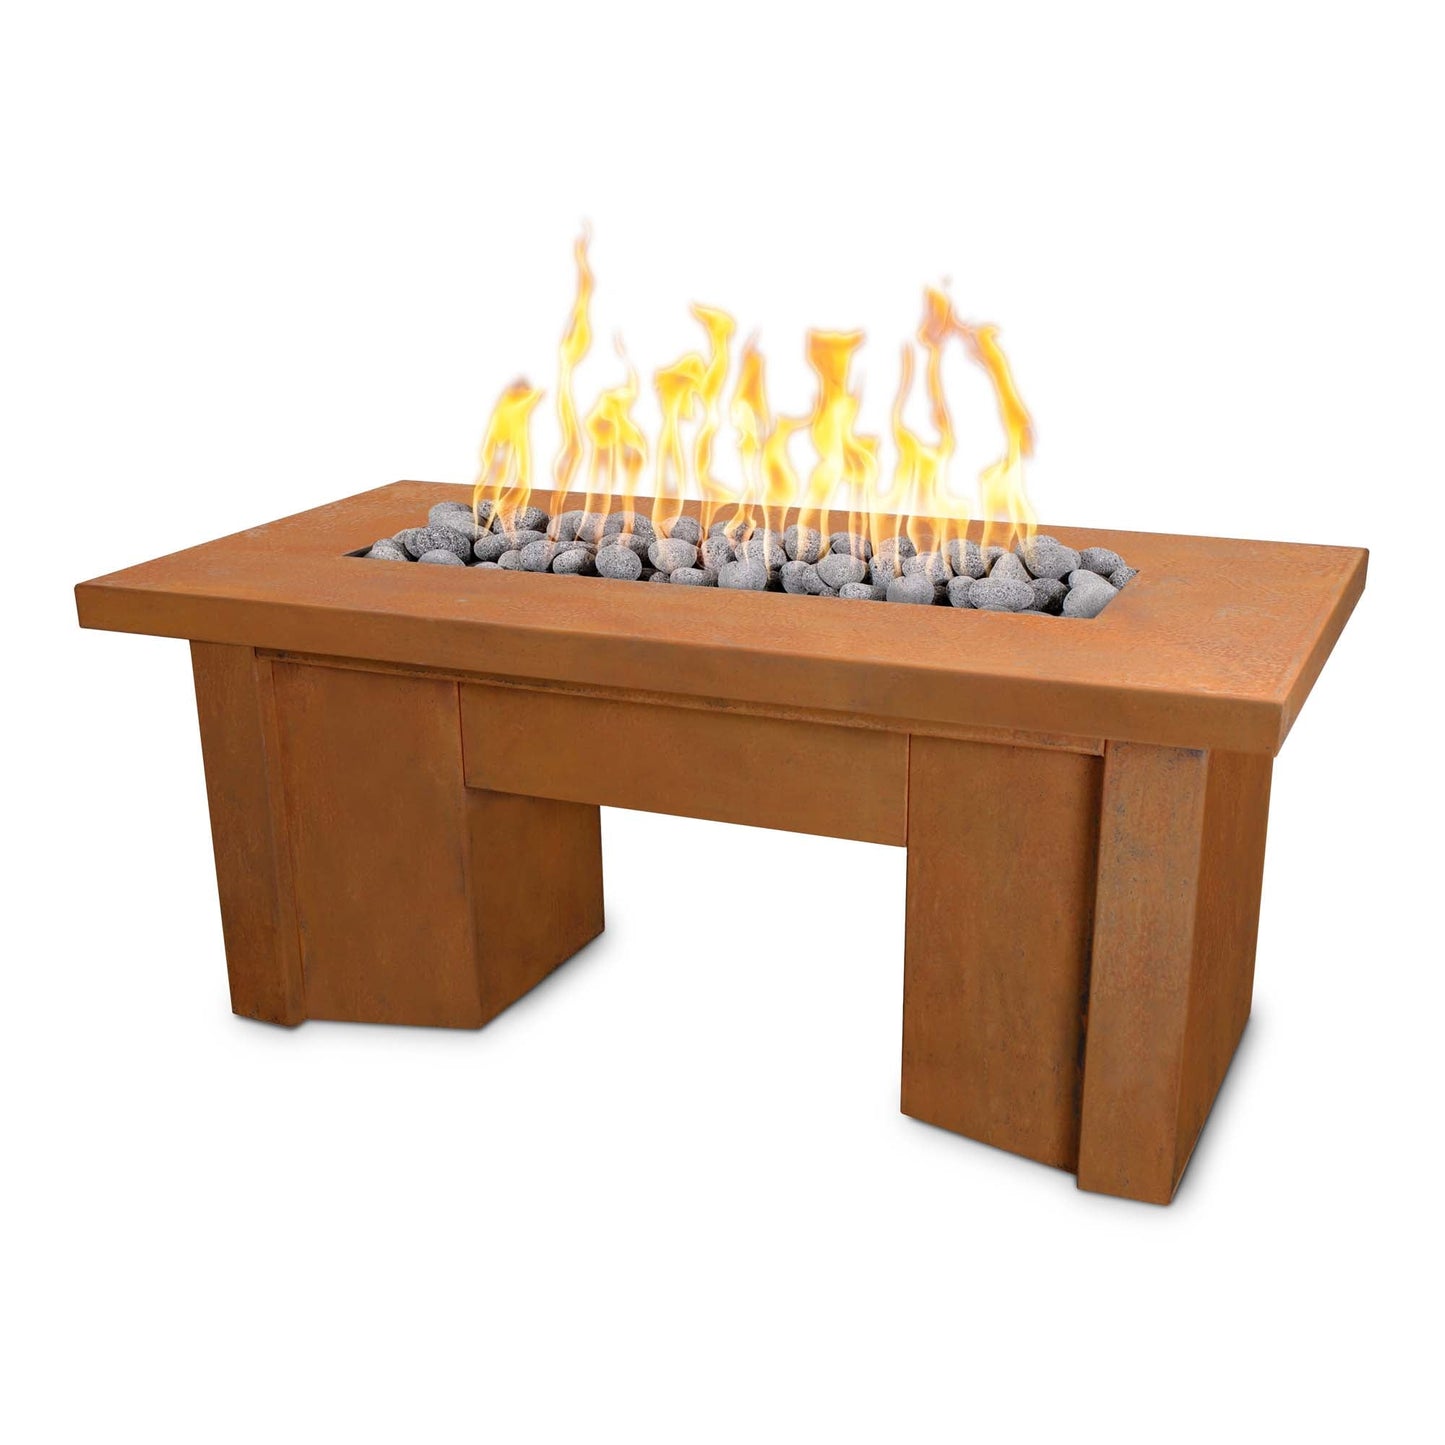 The Outdoor Plus Rectangular Alameda 60" Corten Steel Natural Gas Fire Pit with Flame Sense with Spark Ignition